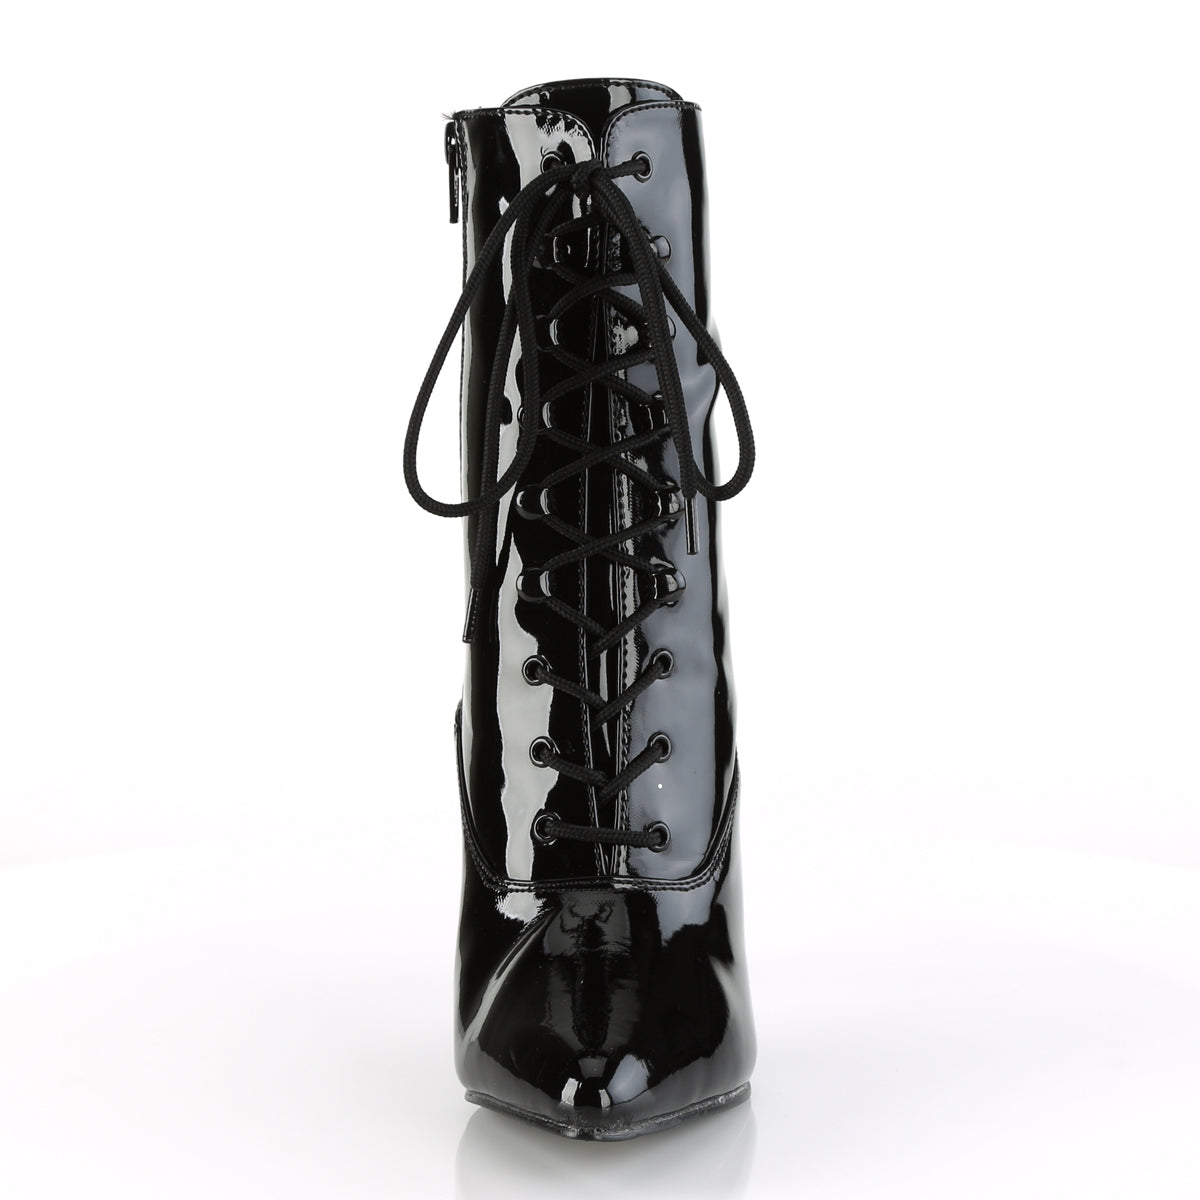 VANITY-1020 Pleaser Black Patent Single Sole Shoes [Kinky Boots]